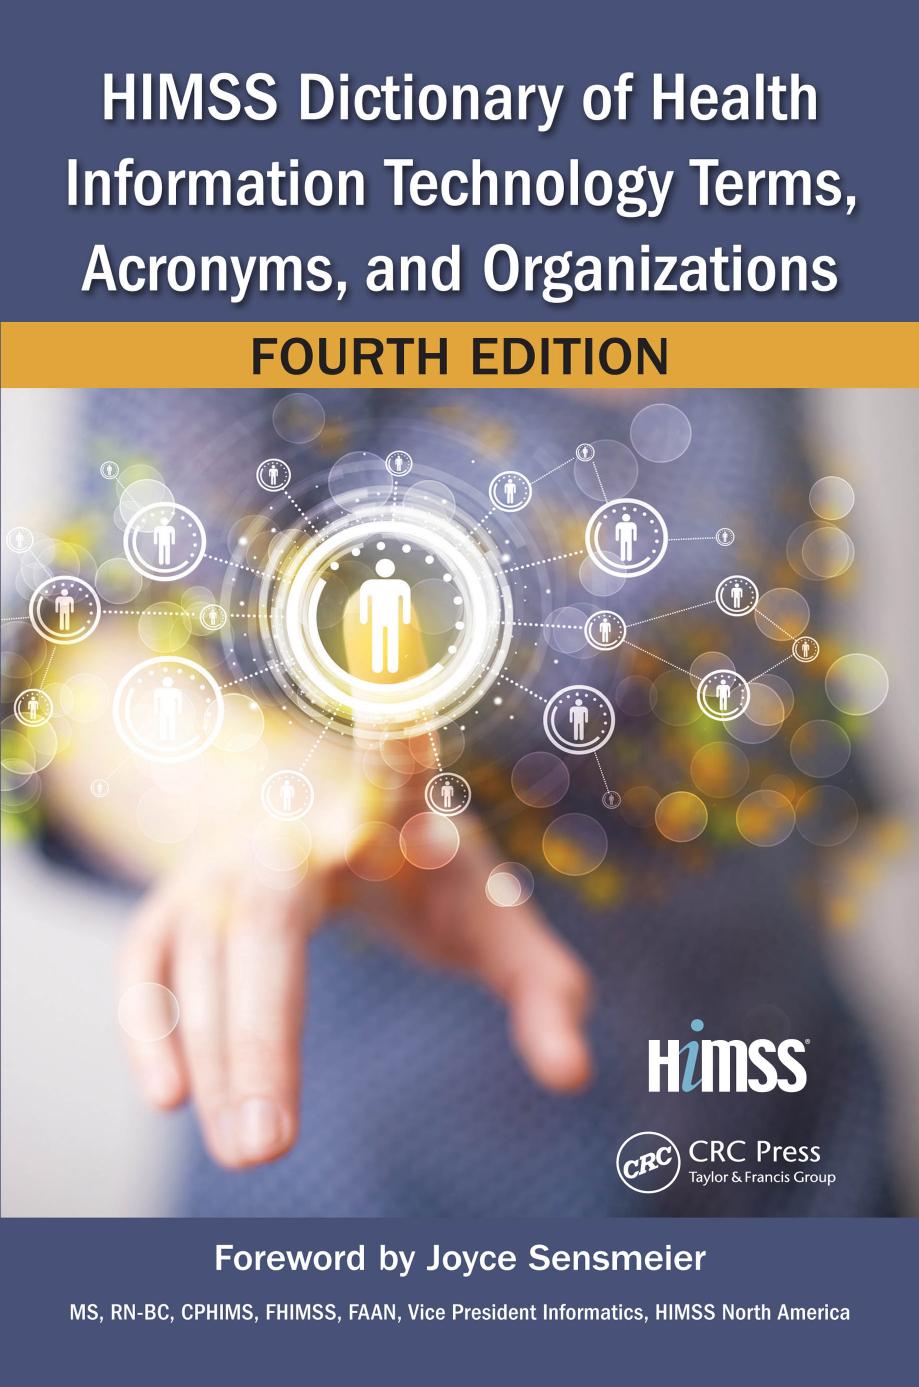 HIMSS Dictionary of Health Information Technology Terms, Acronyms, and Organizations, Fourth Edition by Joyce Sensmeier